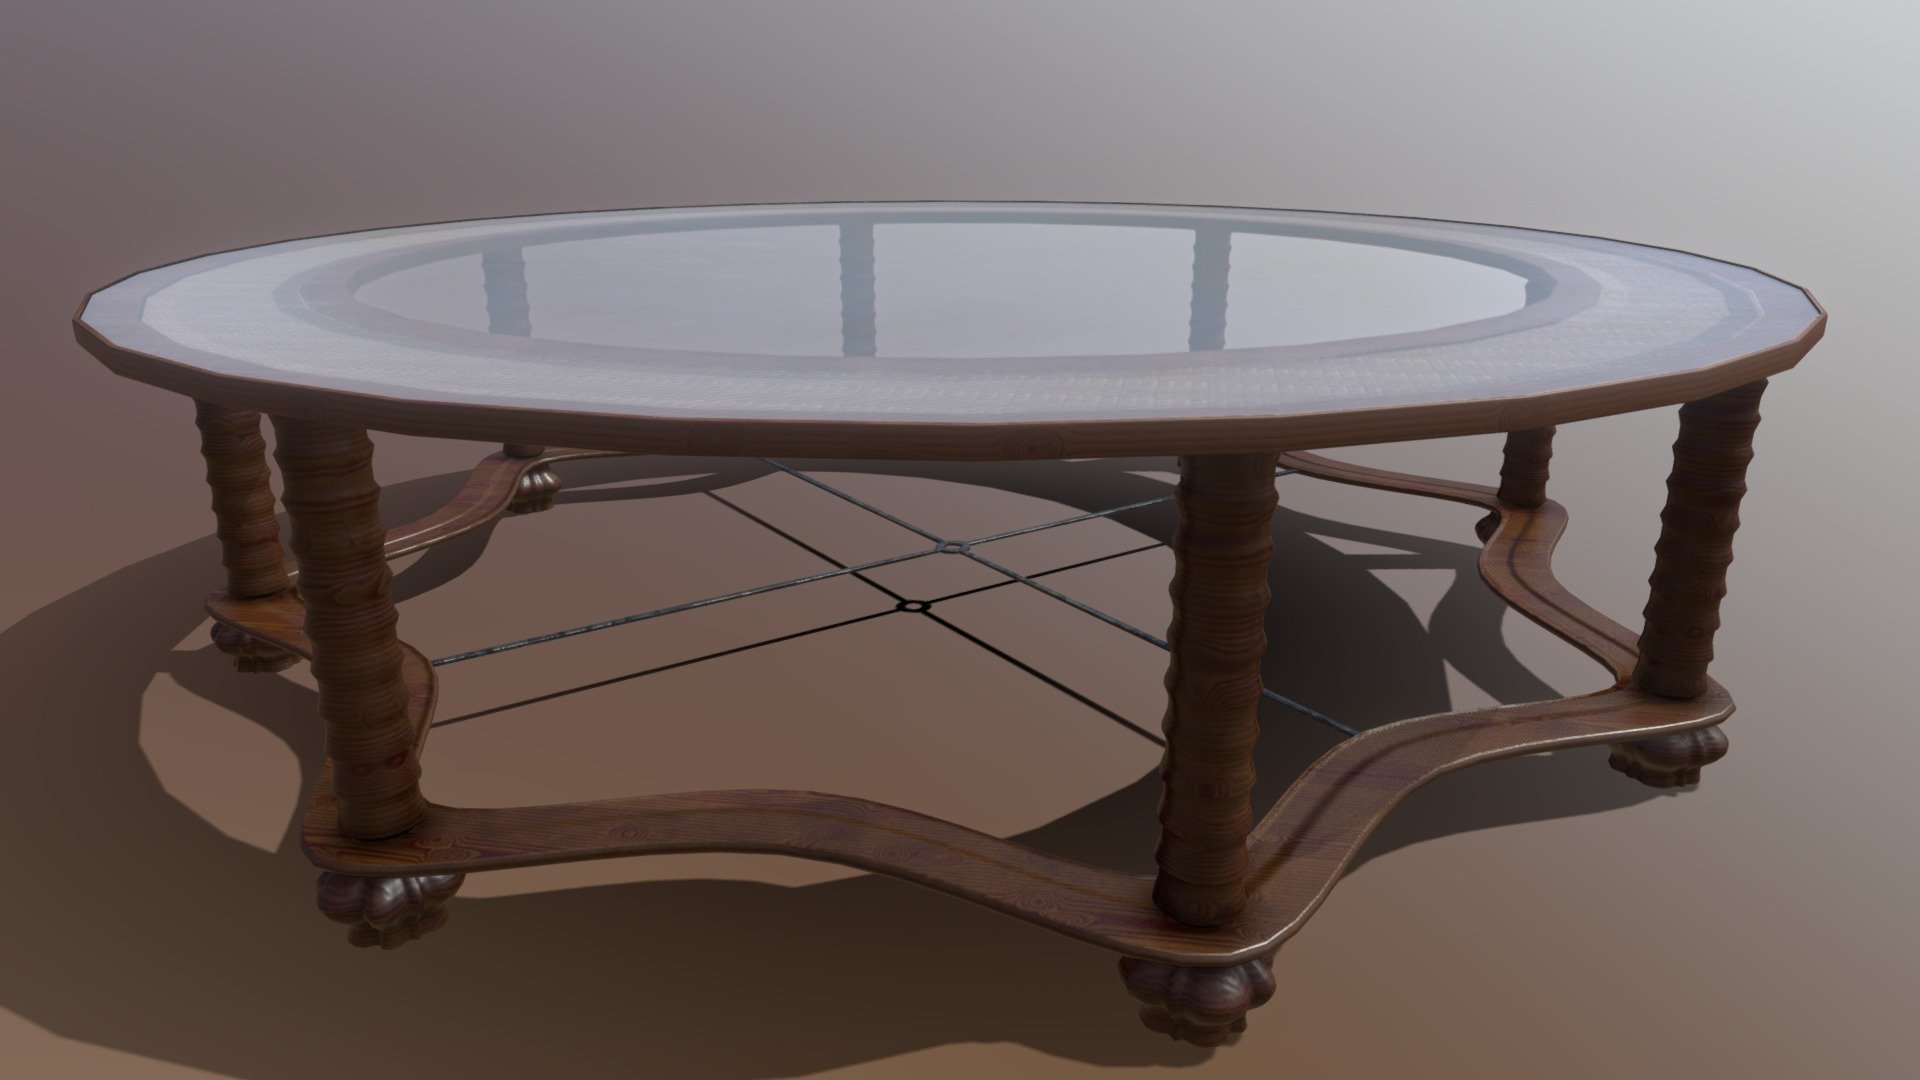 A beautifully designed star-pattern-base coffee table designed by Superfuntimes Media, featuring stylish legs and a wicker inner circle. Excellent for hotel scenes, archviz scenes, and product display! Three 4k texture maps: wood, dark iron and glass 3d model